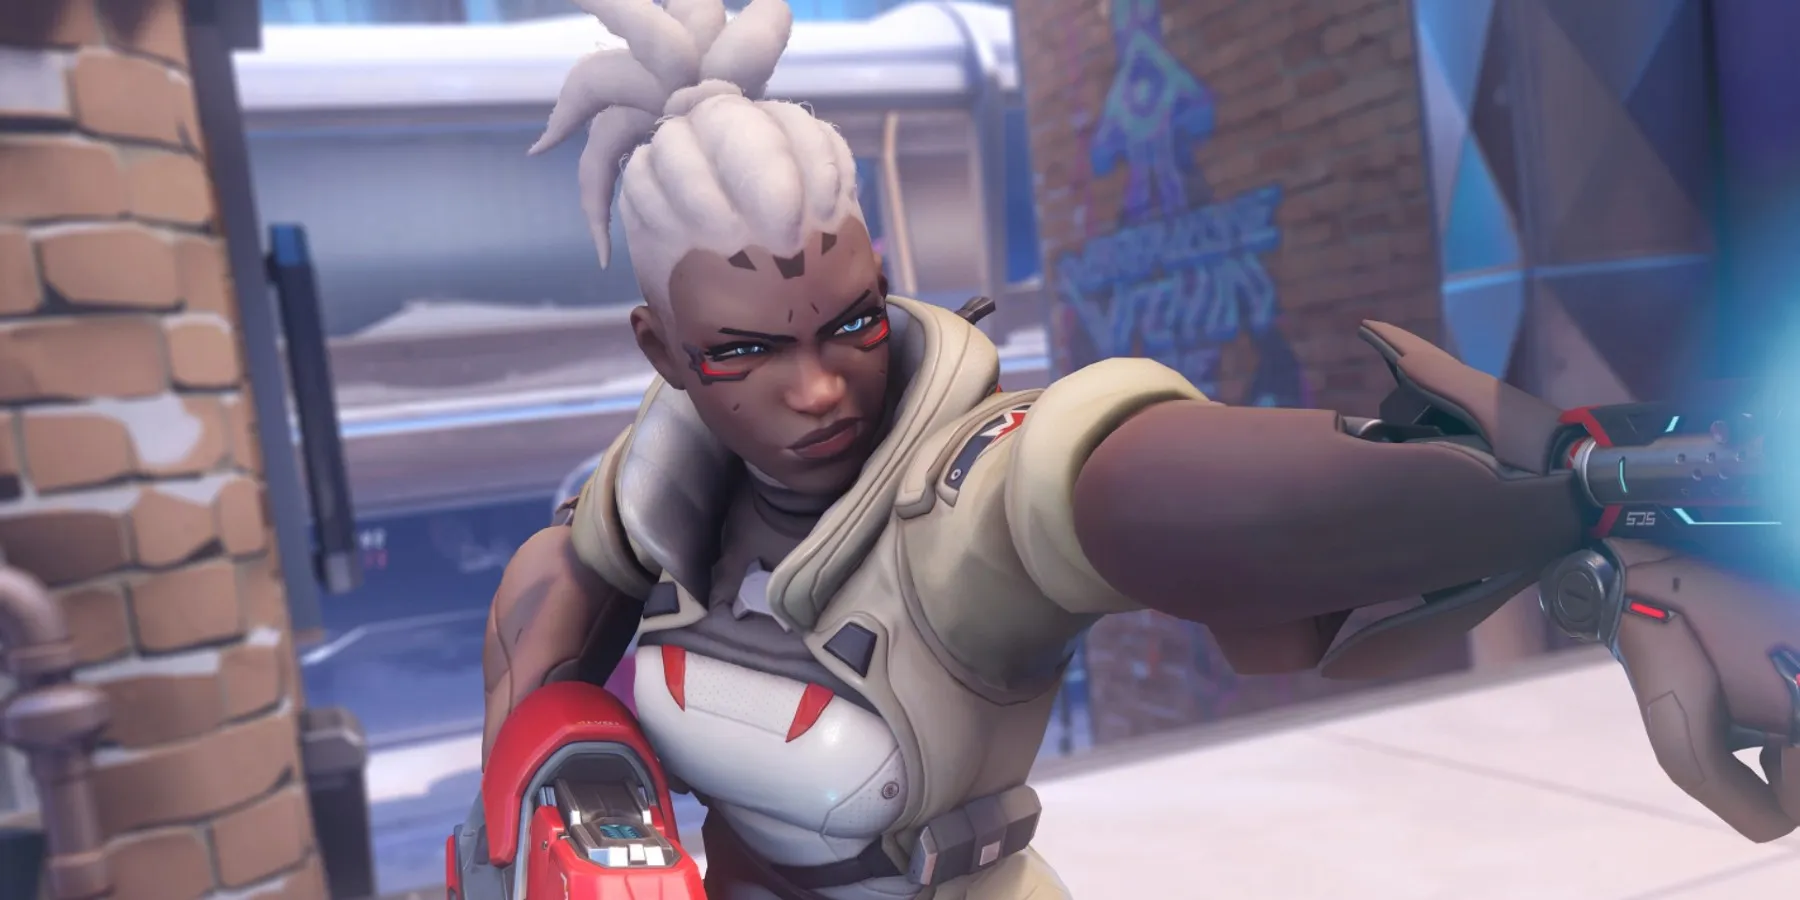 Overwatch 2 Dev Reveals Sojourn Could Get a Nerf in Season 2